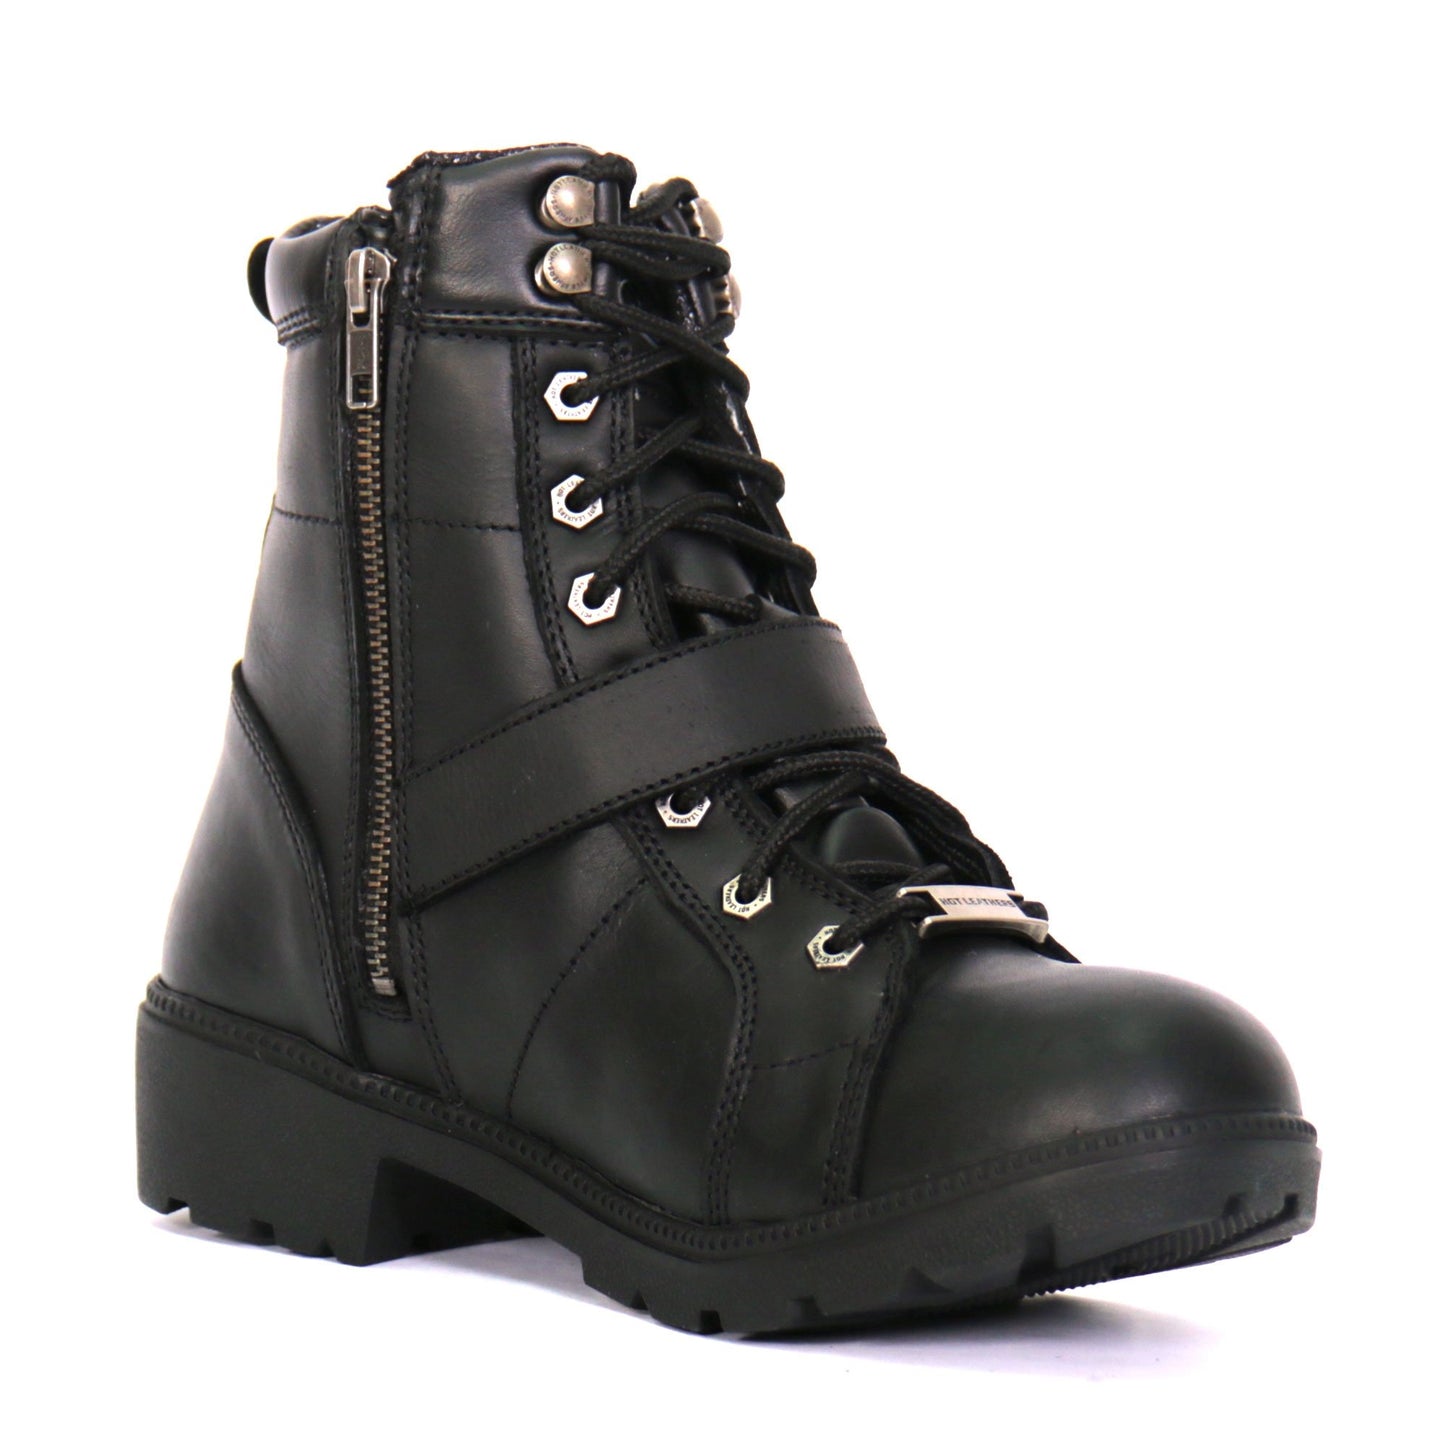 Hot Leathers BTL1004 Ladies 6-inch Black Lace-Up Leather Boots with Buckle Strap